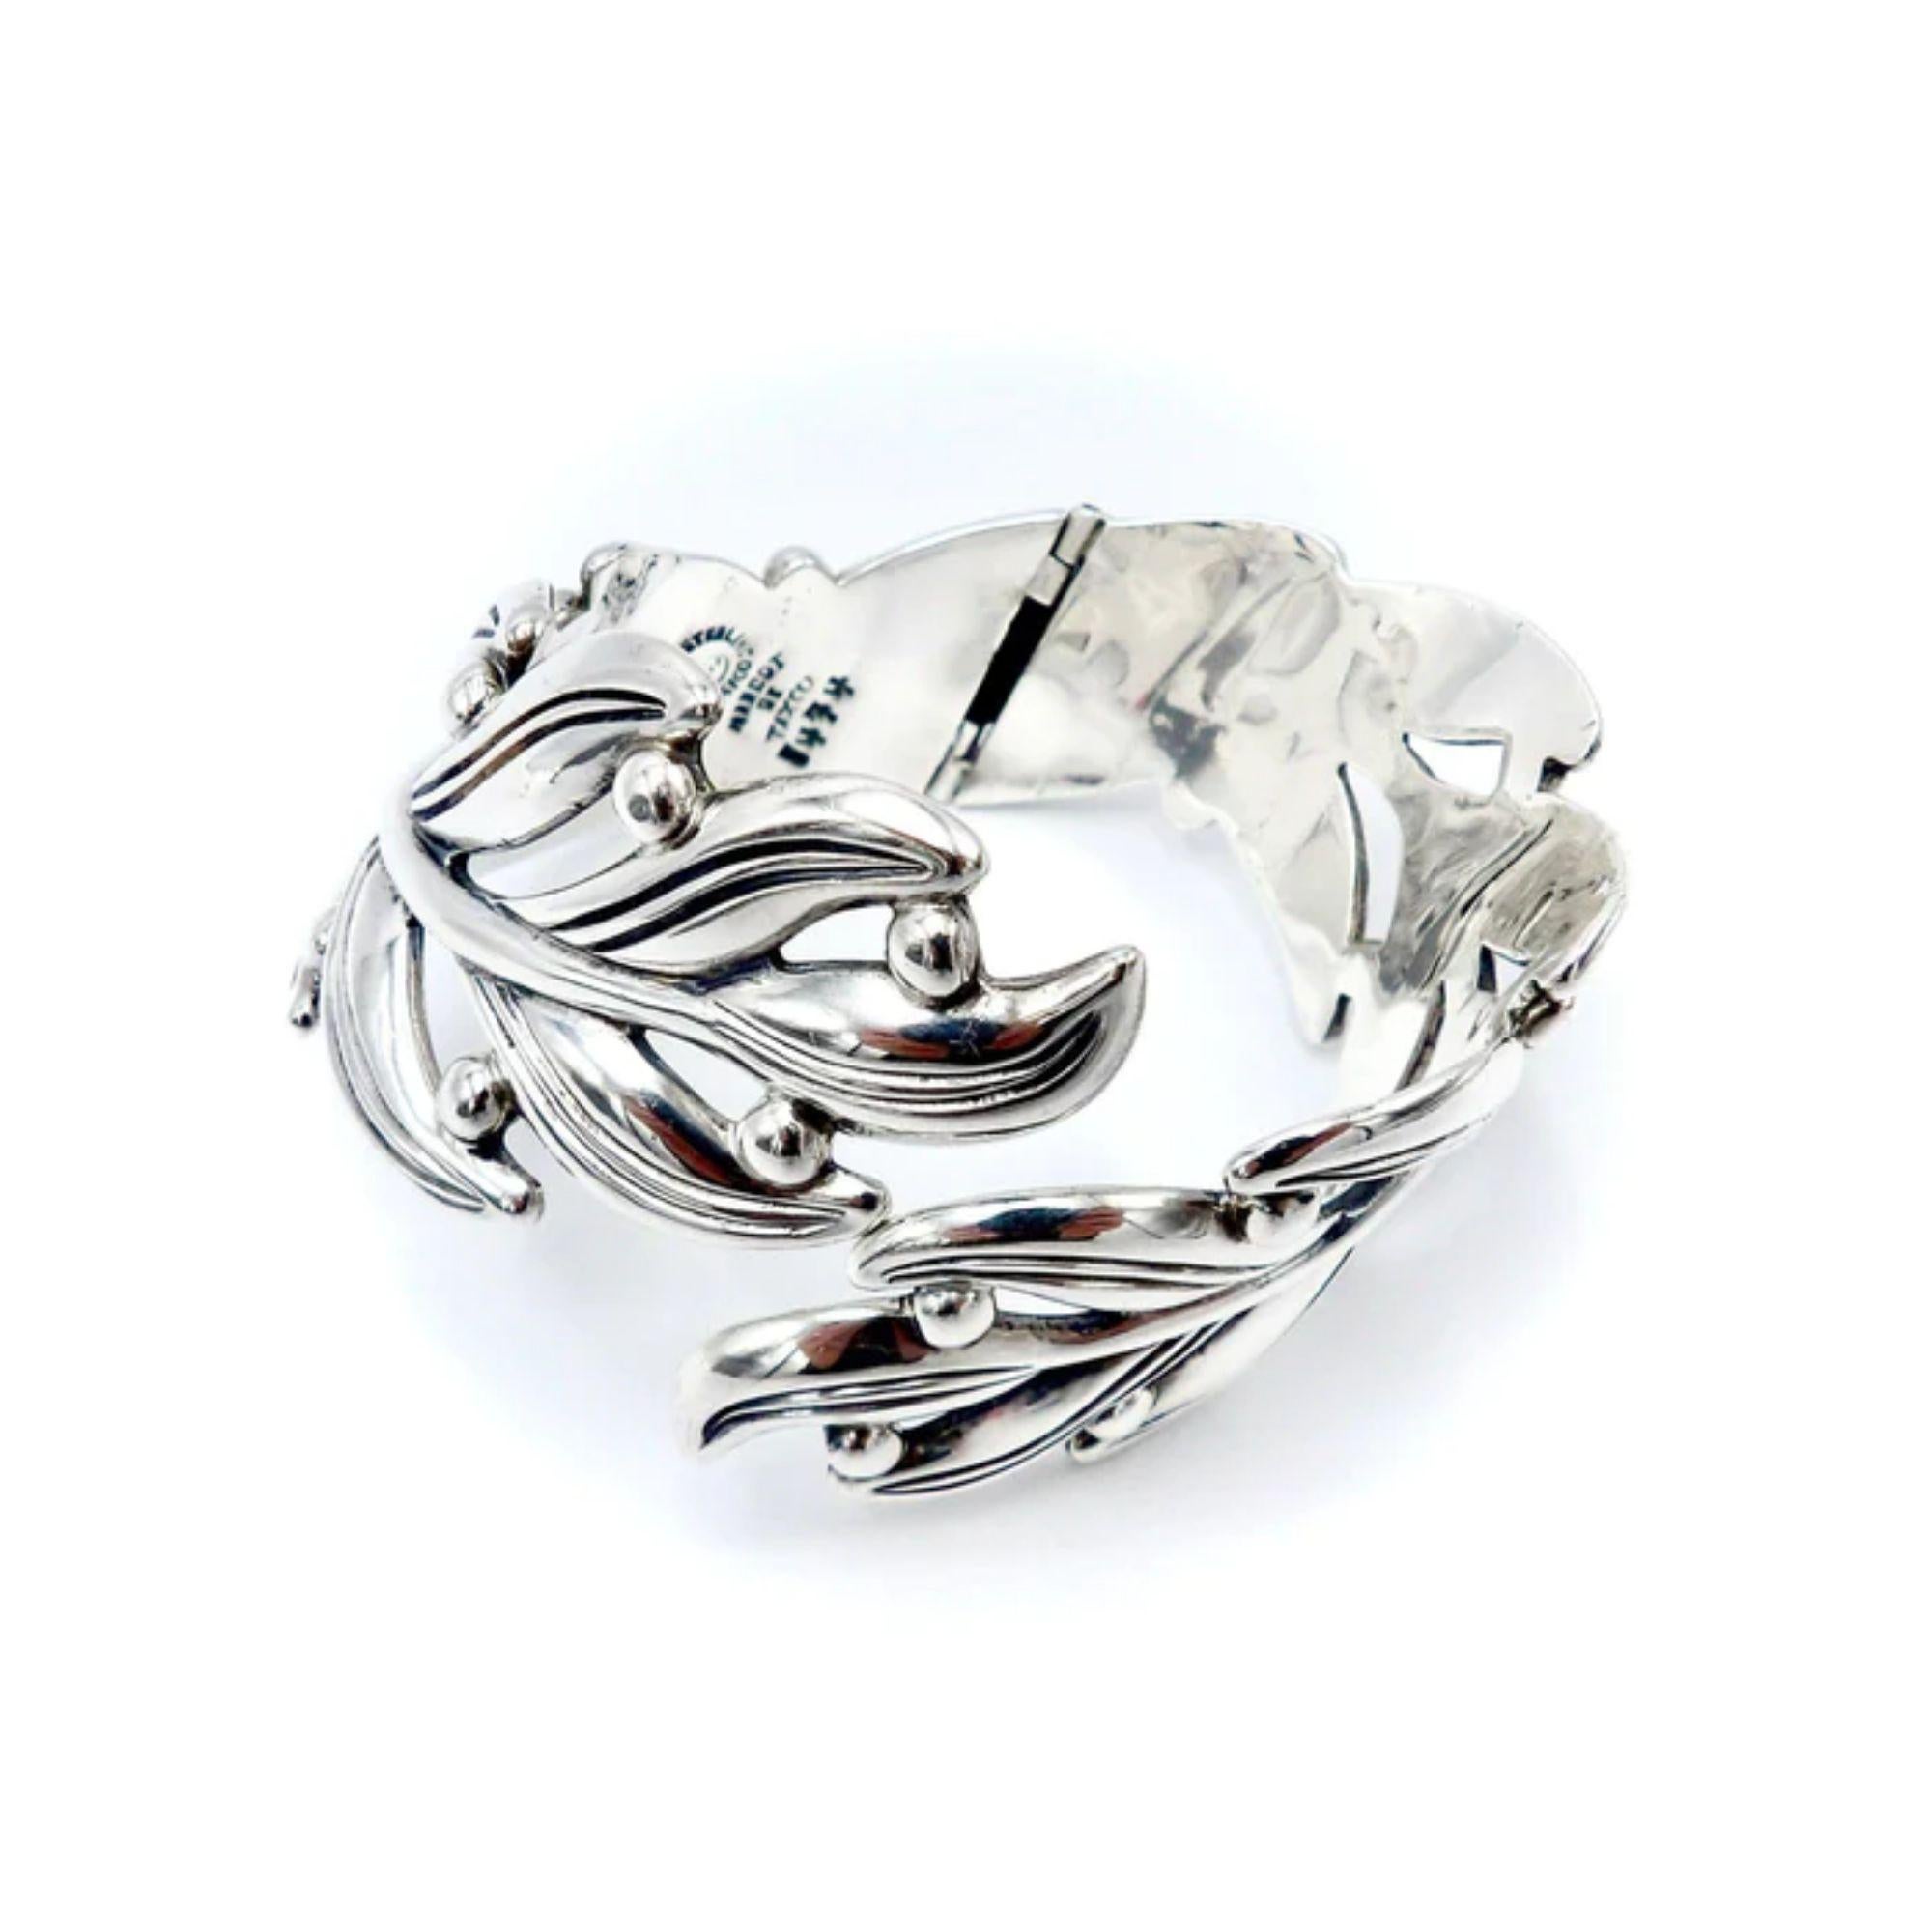 Margot De Taxco Sterling Silver Leaf Bracelet
 
A beautiful sterling silver hinged clamper bracelet by Margot De Taxco, made in Mexico, in a modernistic, stylized leaf design with flat and curved surfaces. This Margot de Taxco design is known as